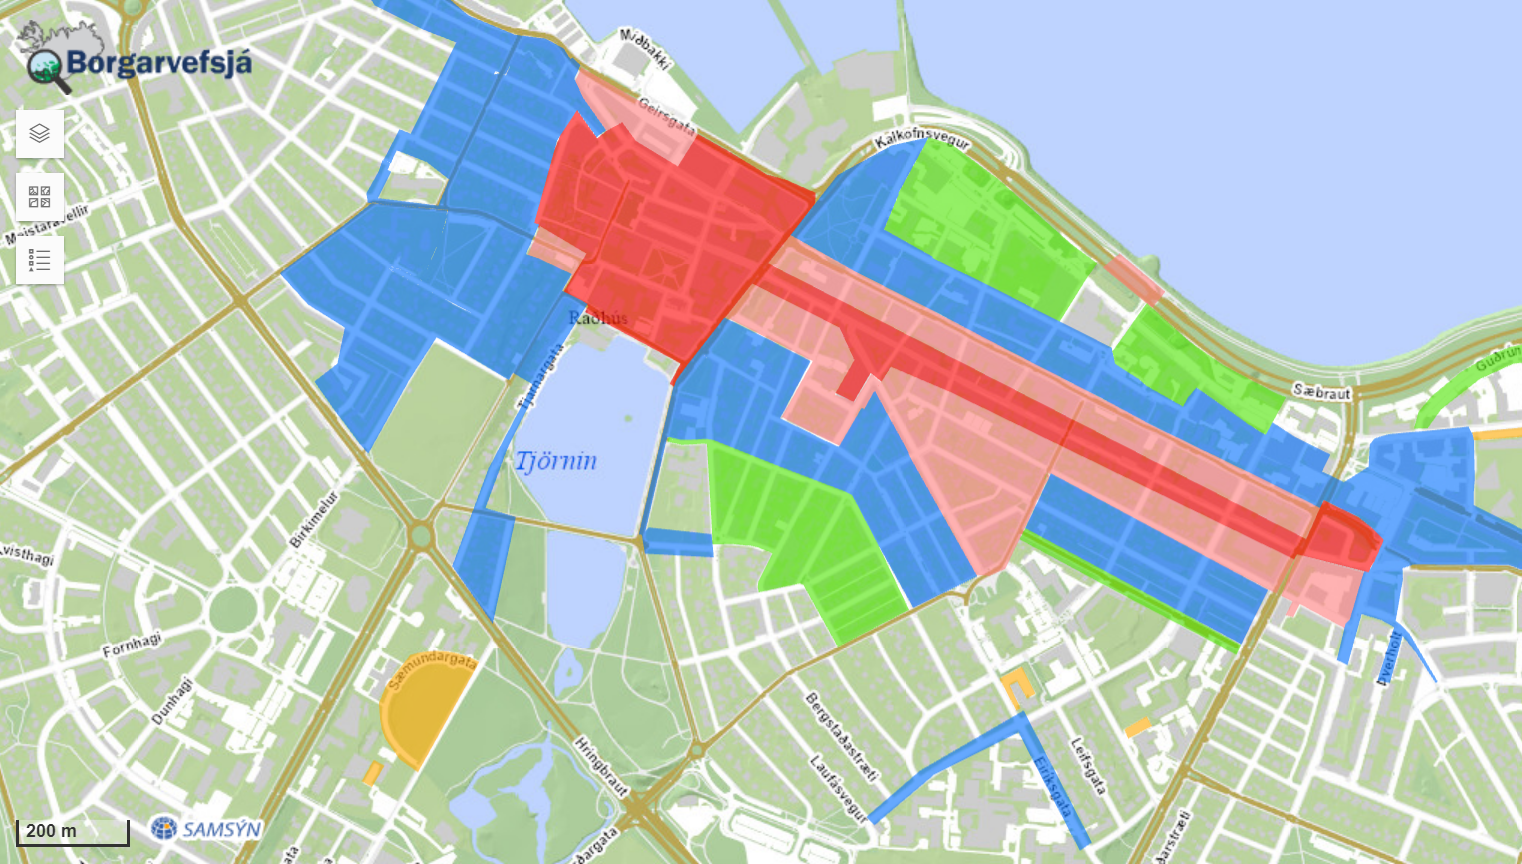 Coloured areas of different parking tarriffs in Reykjavik.